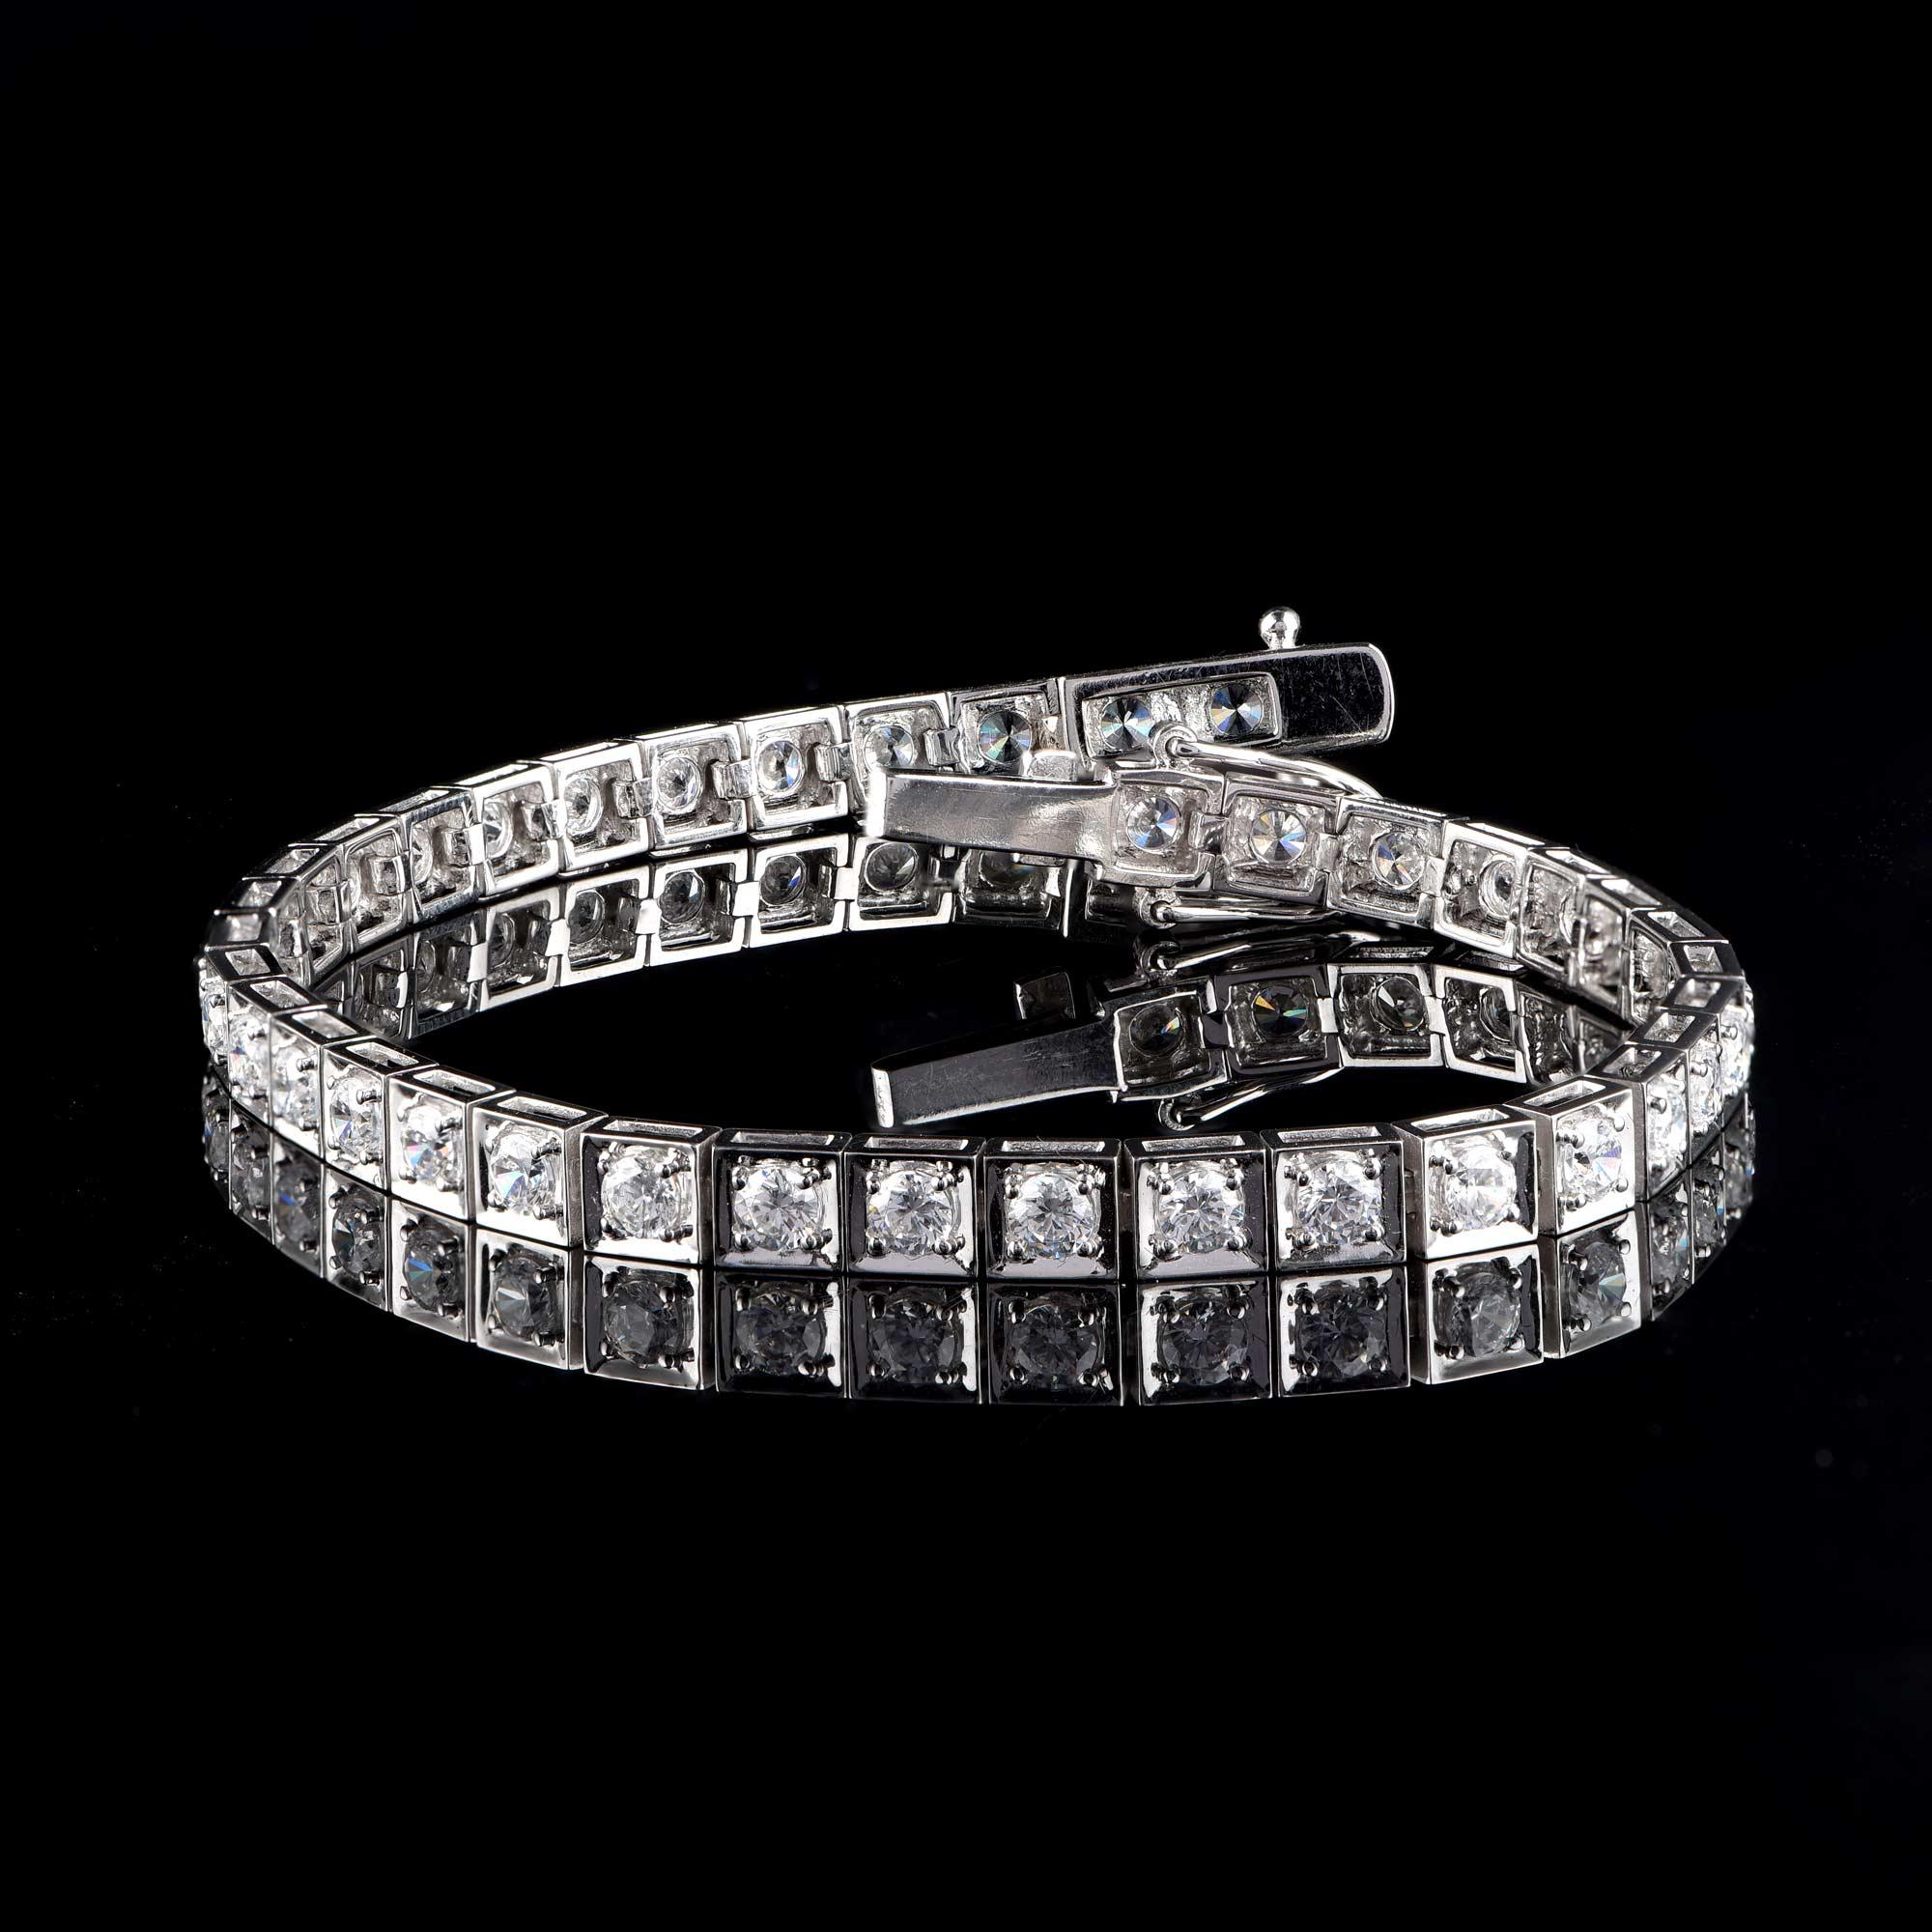 This dazzling bracelet is made by our in-house experts in 18-karat white gold and accentuated with 38 brilliant-cut diamonds in prong setting. The total diamond weight is 4 carats and the diamonds are graded H-I Color, I2 Clarity.  

This piece is